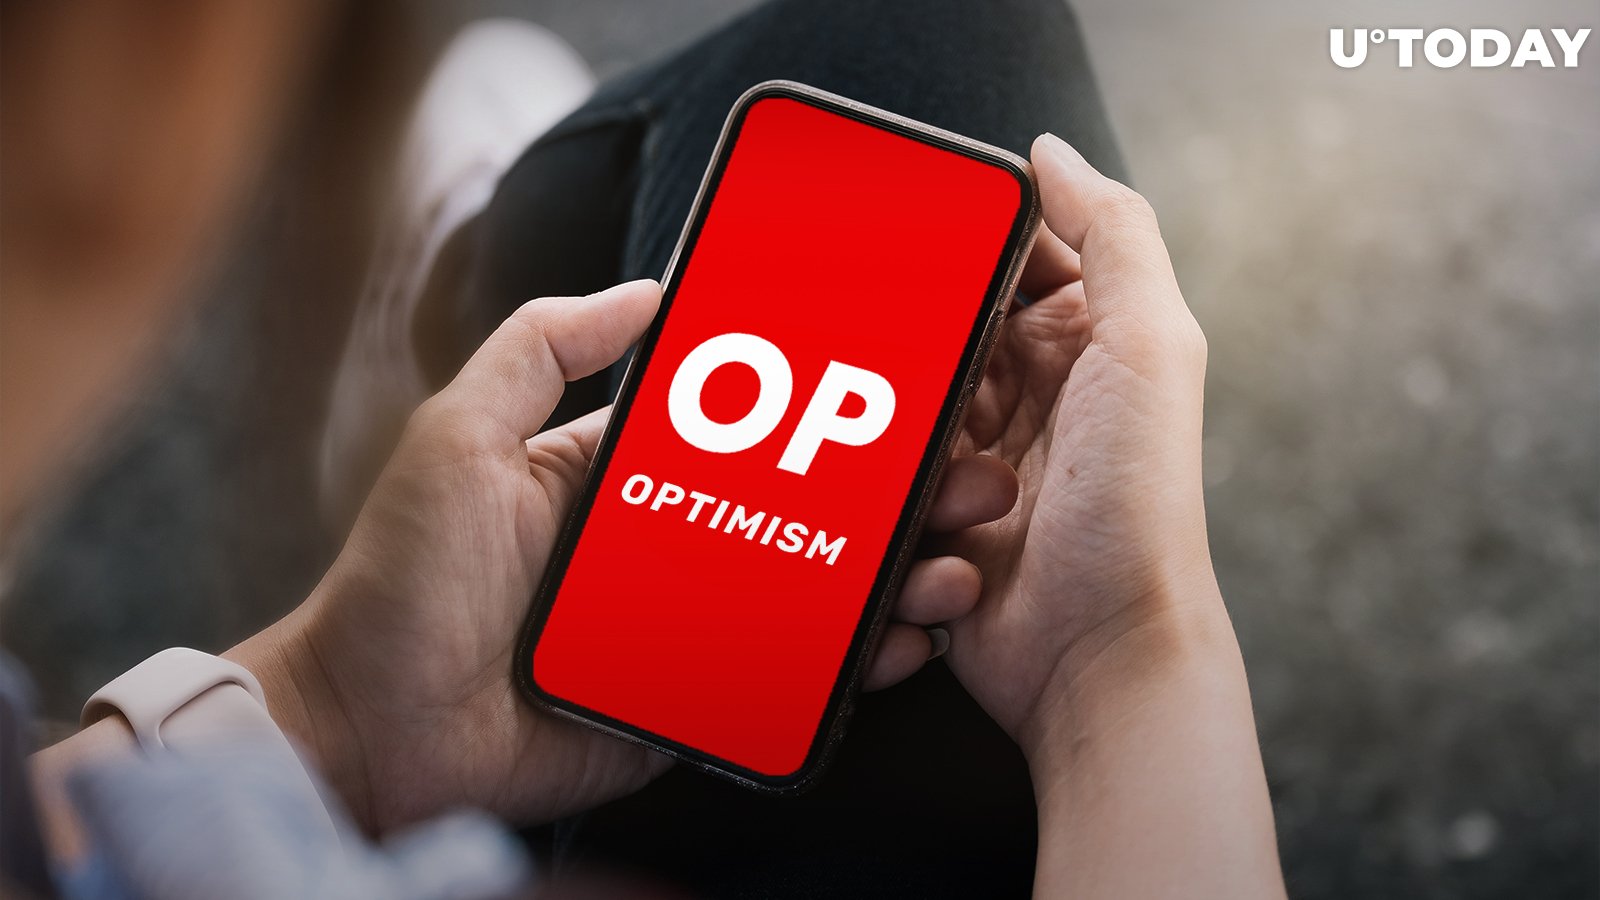 Optimism (OP) Sees 300% Spike in Daily Transactions, Here's Price Impact